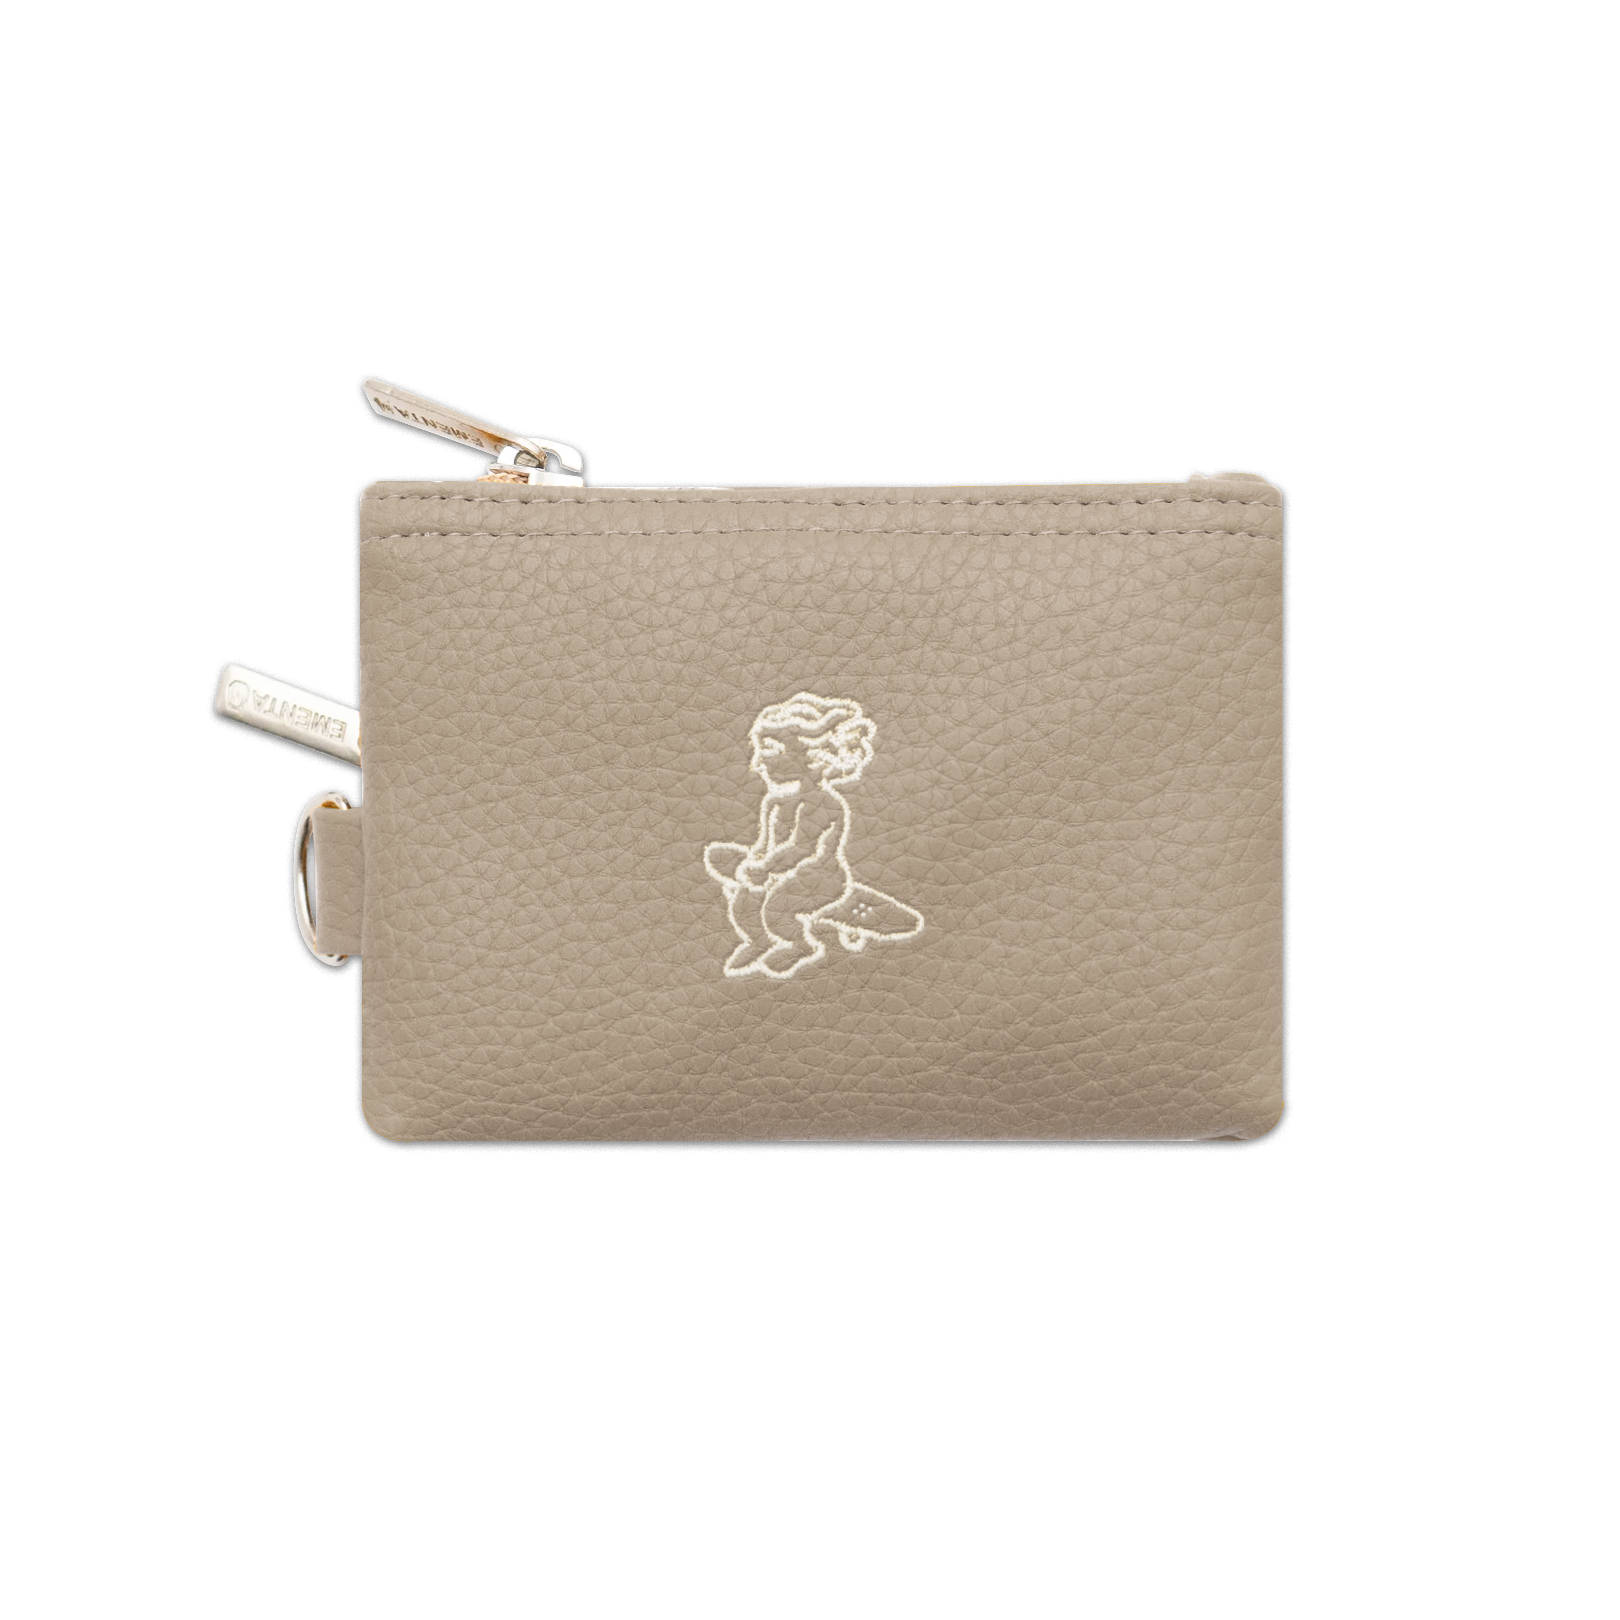 Cota Baby Napa Wallet Taupe